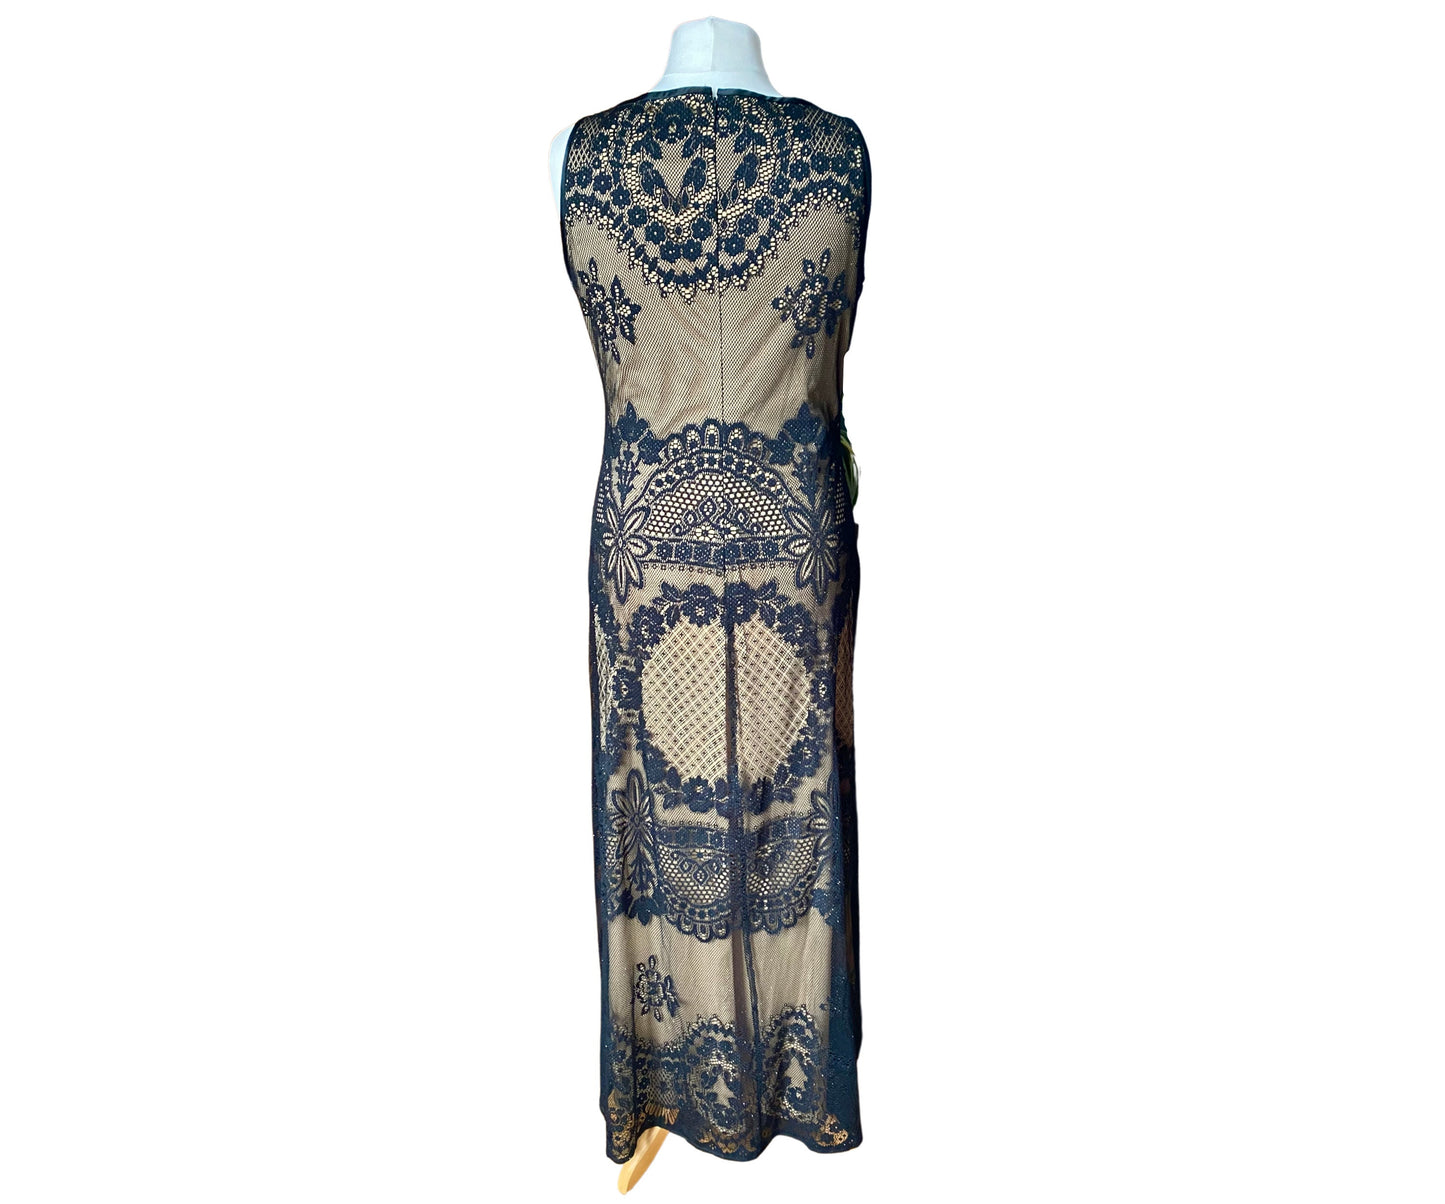 90s black lace dress. Vintage embroidered mesh maxi. Sleeveless, with satin trim and a gold lining. Approx U.K  size 14-16